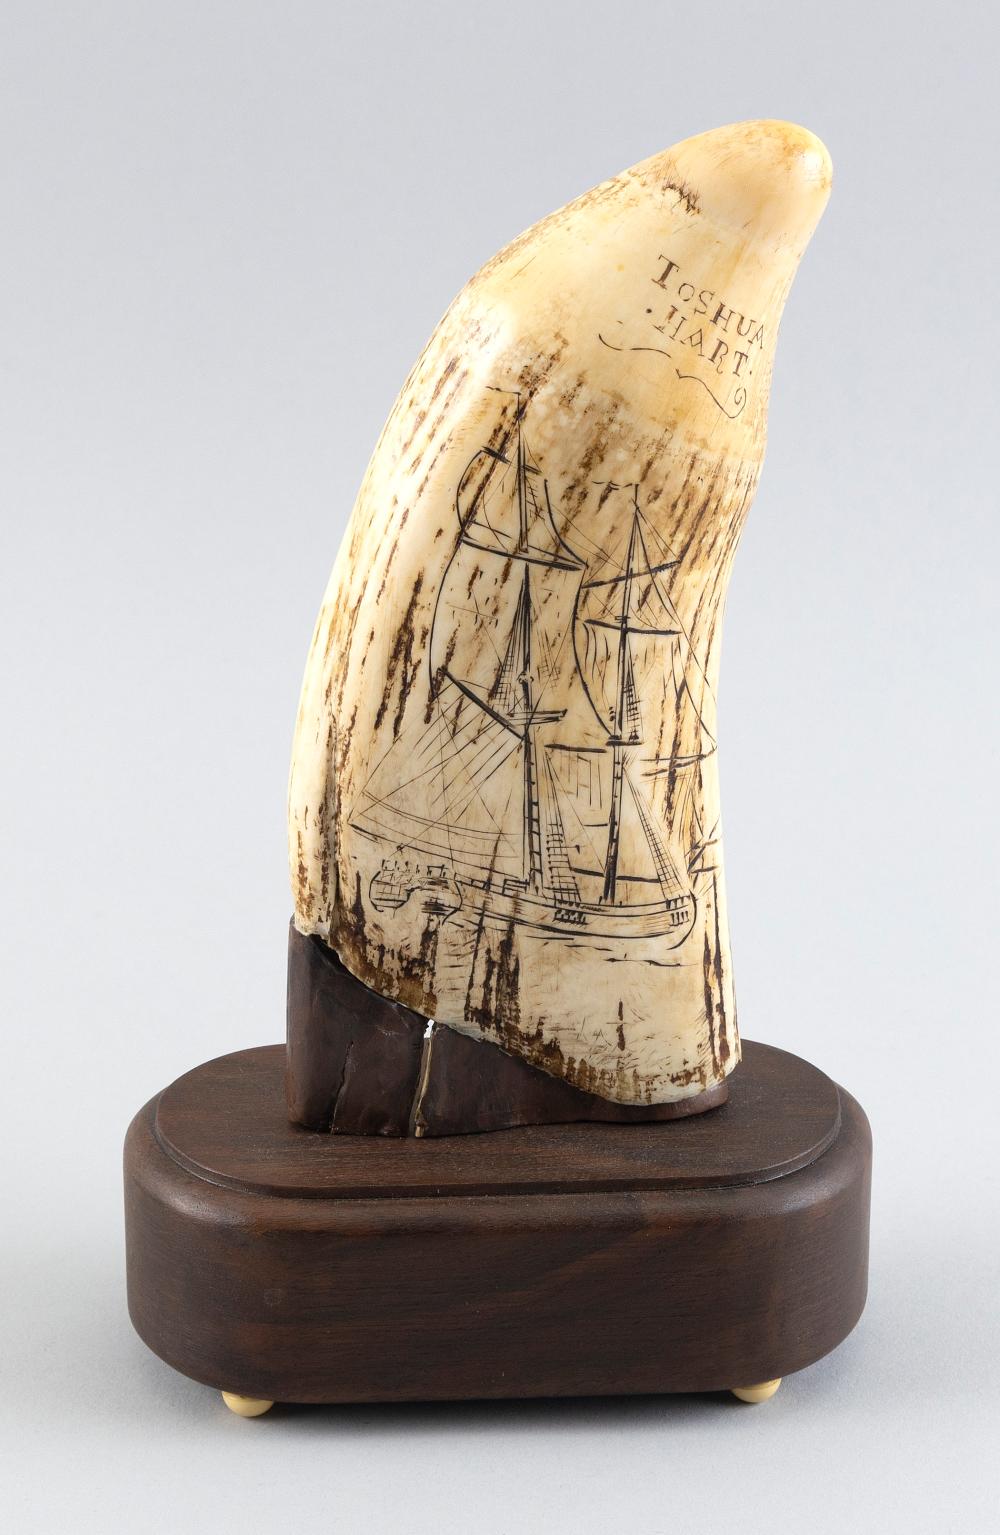 * ENGRAVED WHALE'S TOOTH "TOSHUA